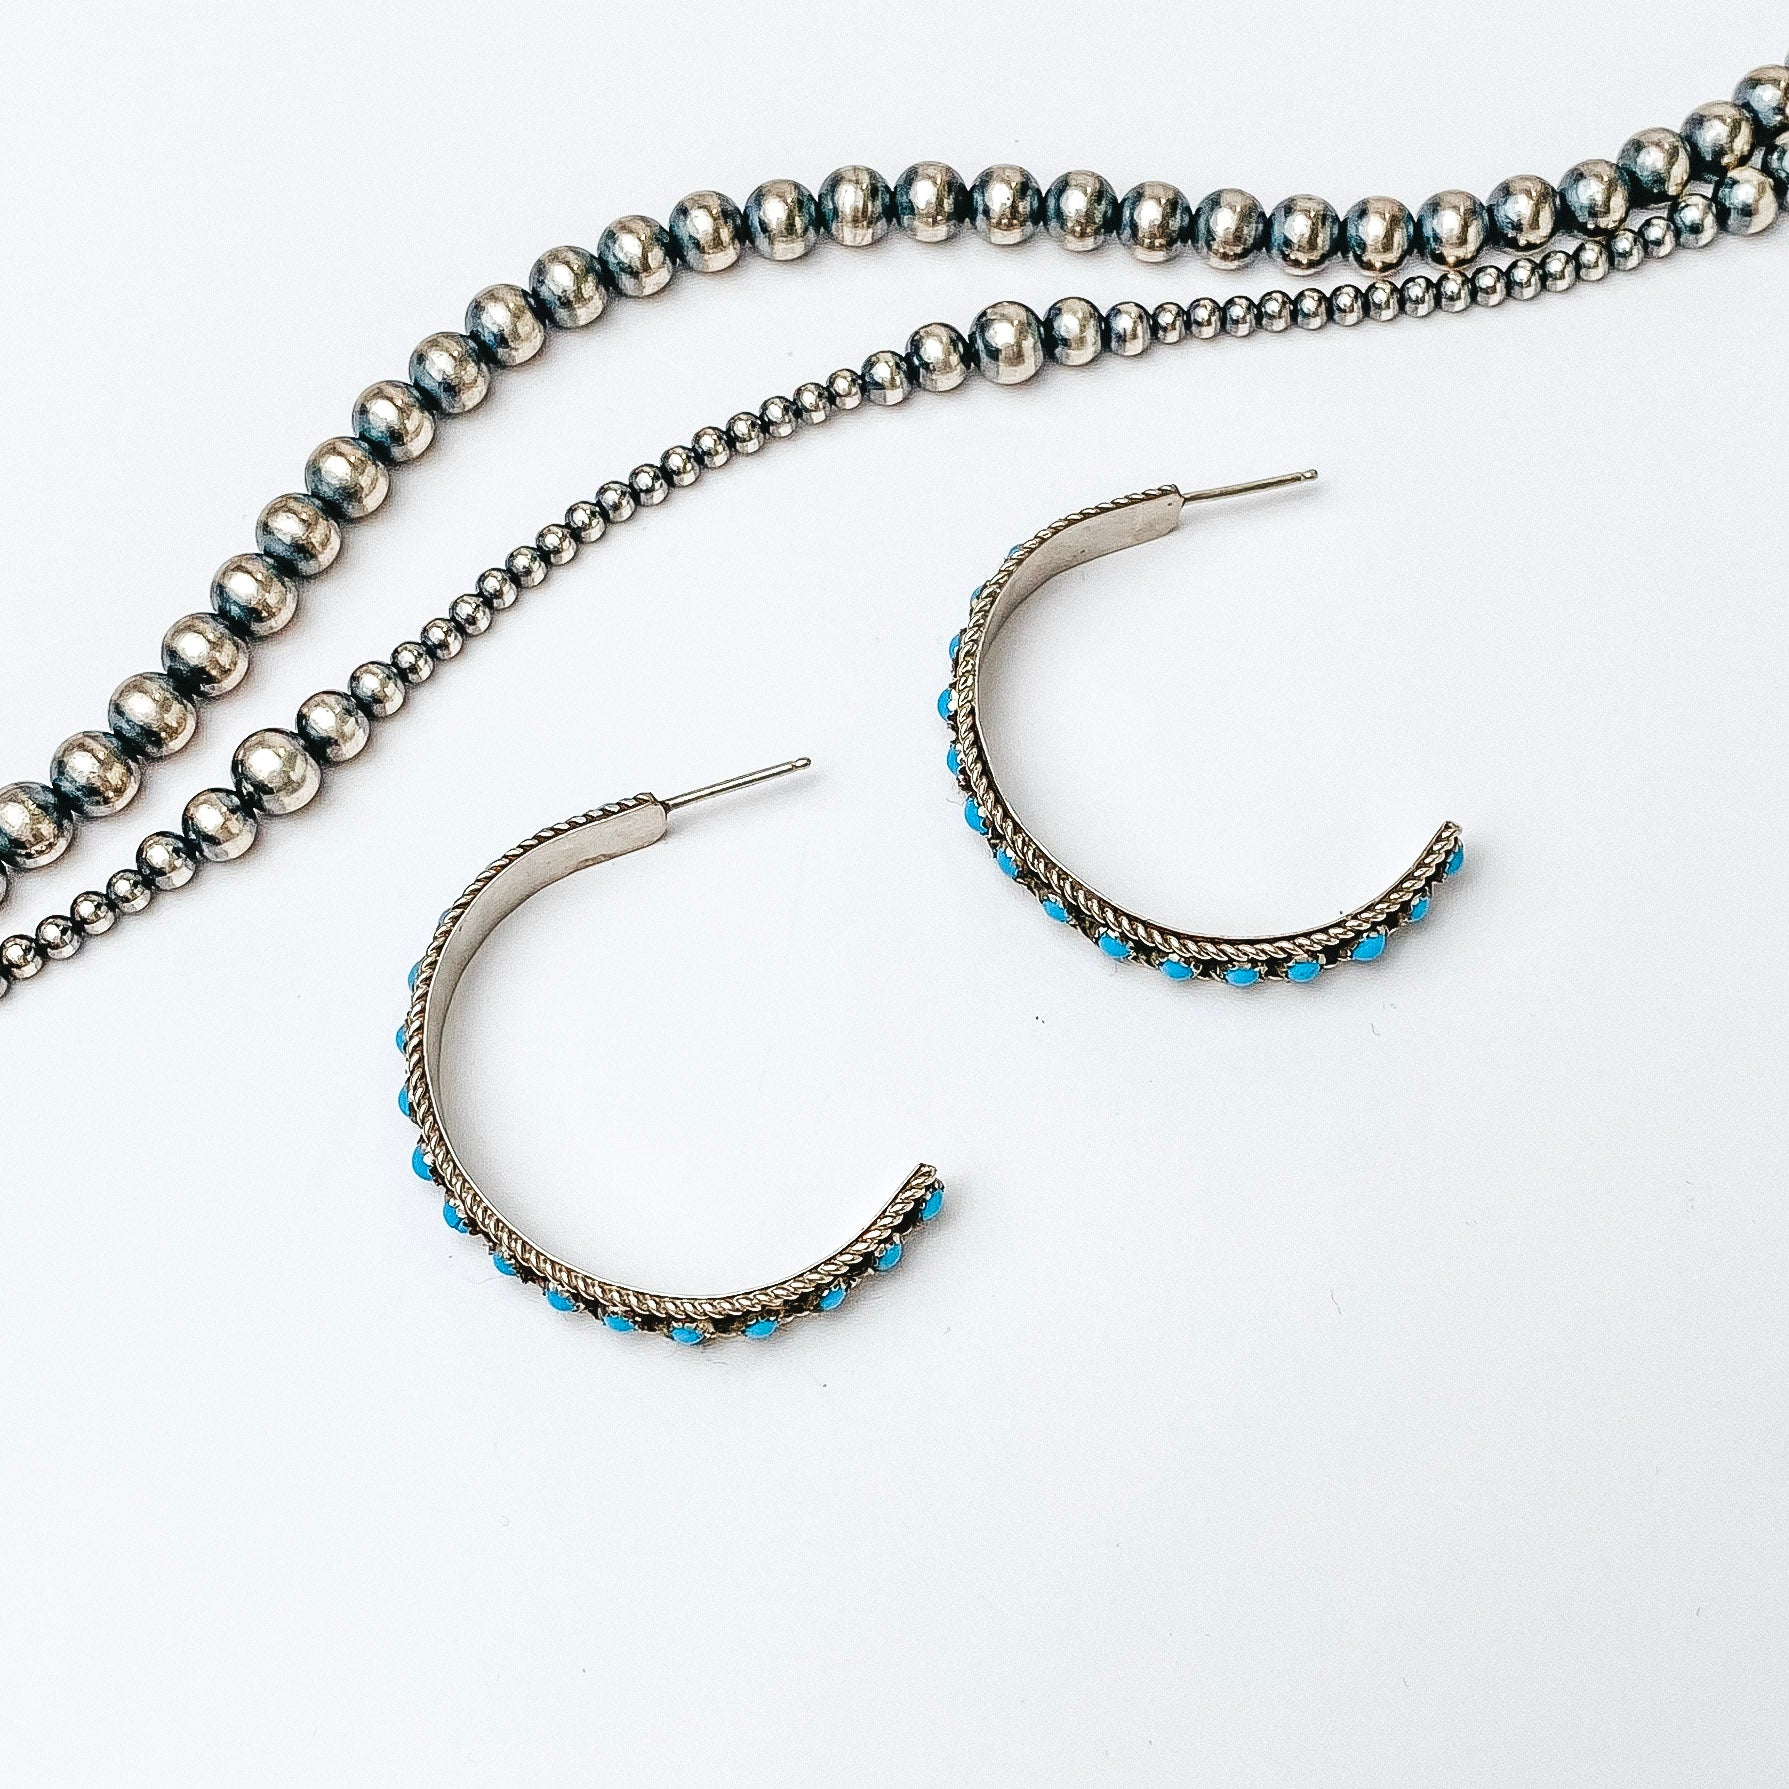 Chester Charley | Navajo Handmade Genuine Sterling Silver Hoops with Turquoise Stones - Giddy Up Glamour Boutique